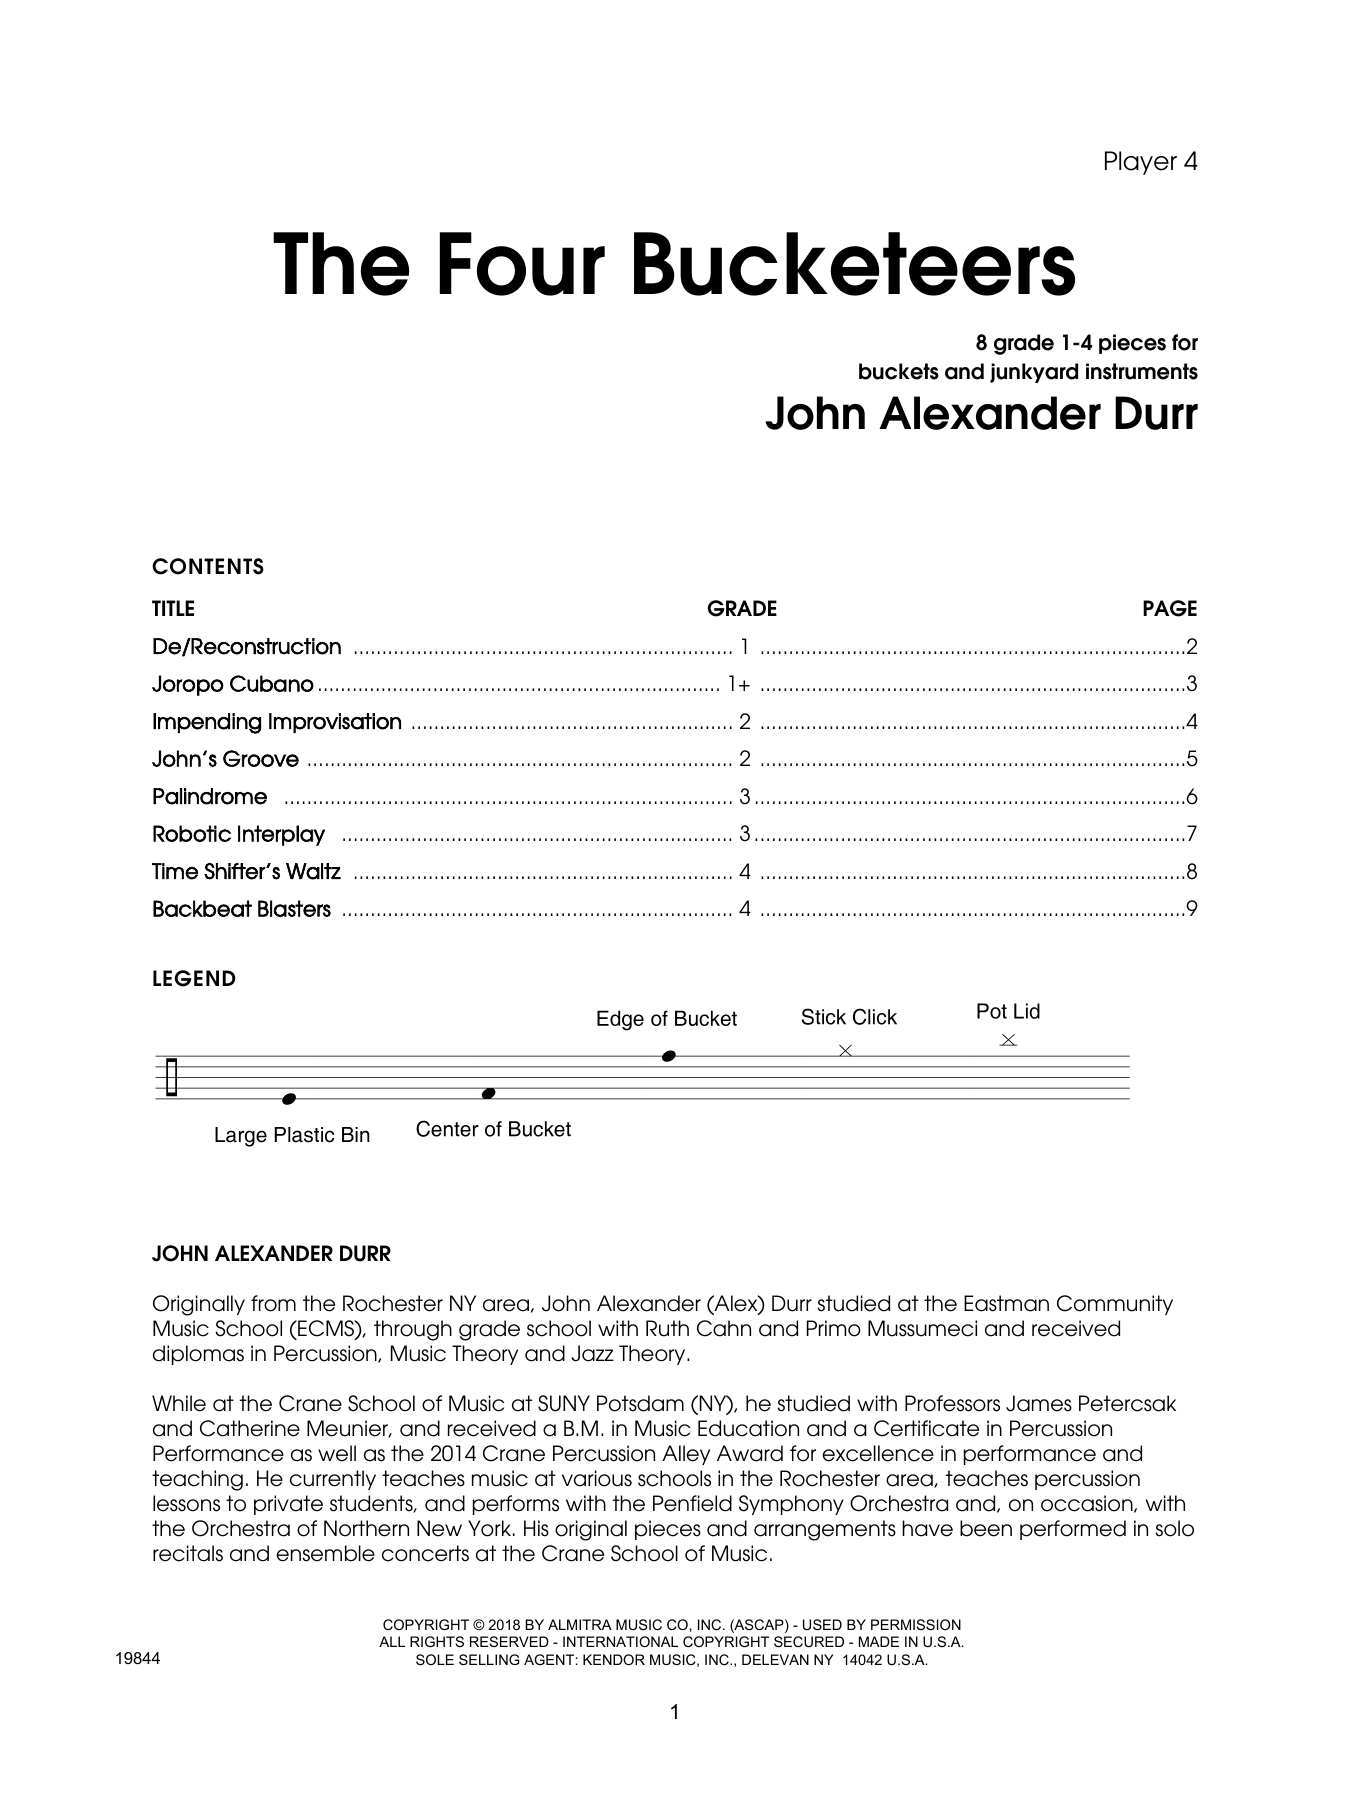 Download John Durr The Four Bucketeers - Percussion 4 Sheet Music